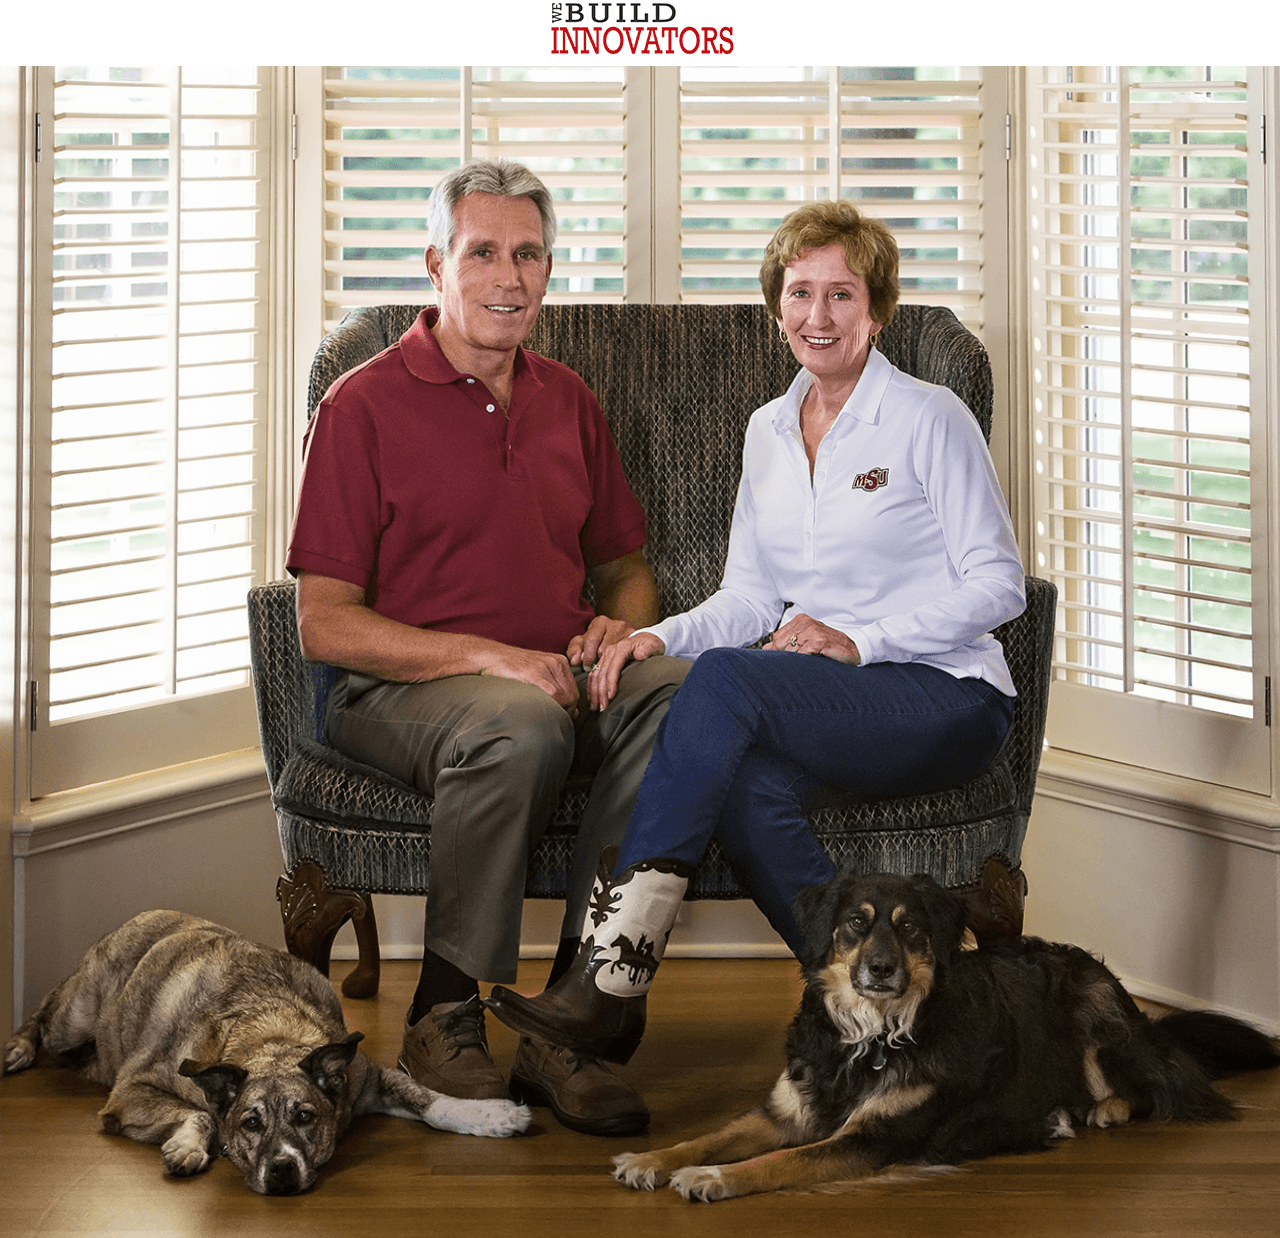 TTU alumna Suzanne Shipley with husband and dogs